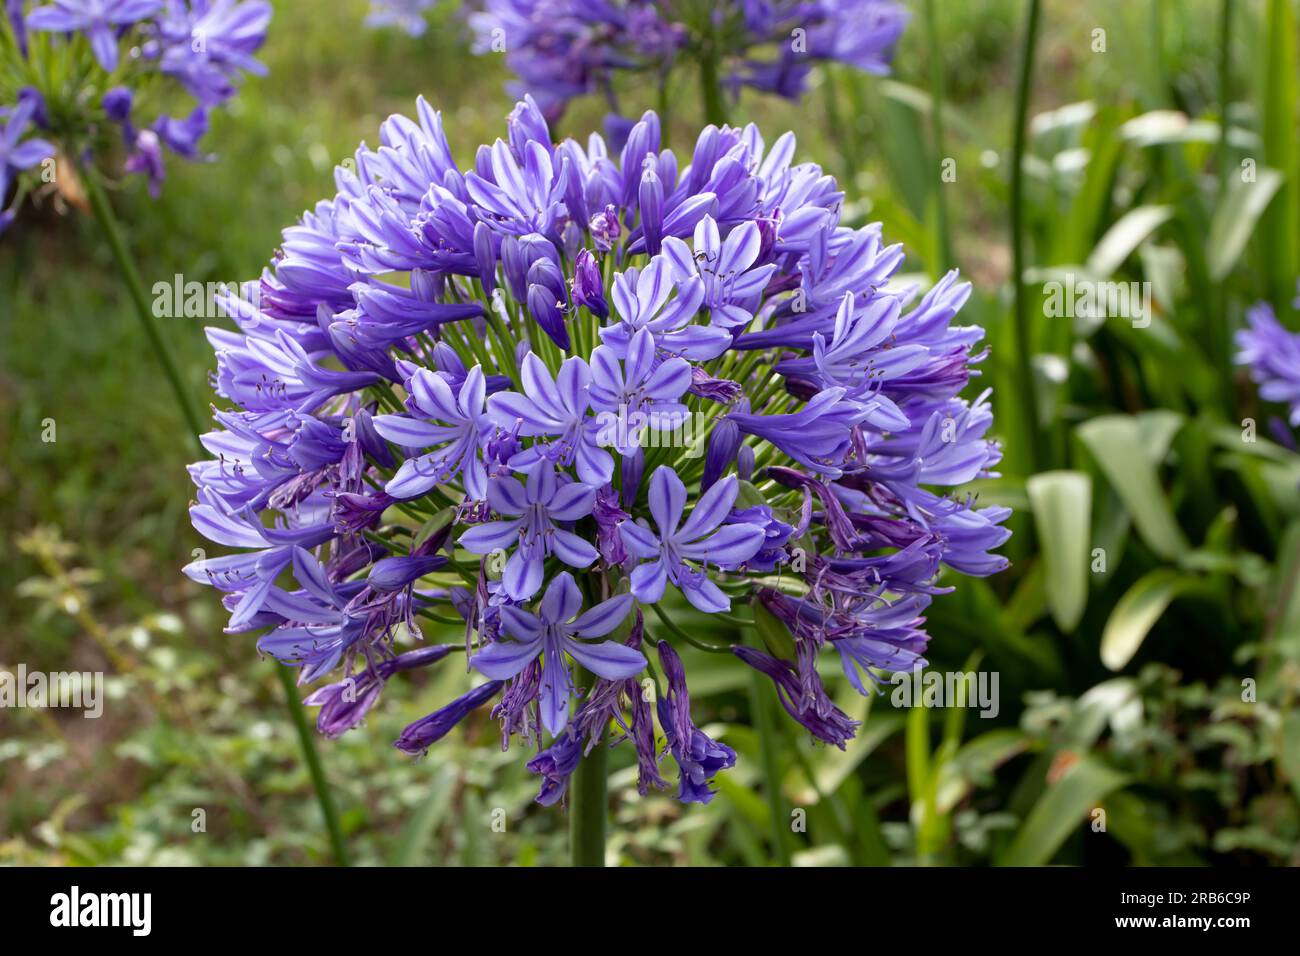 Agapanthus praecox or common agapanthus umbel inflorescence closeup. Blue lily,African lily or lily of the Nile flowers. Stock Photo